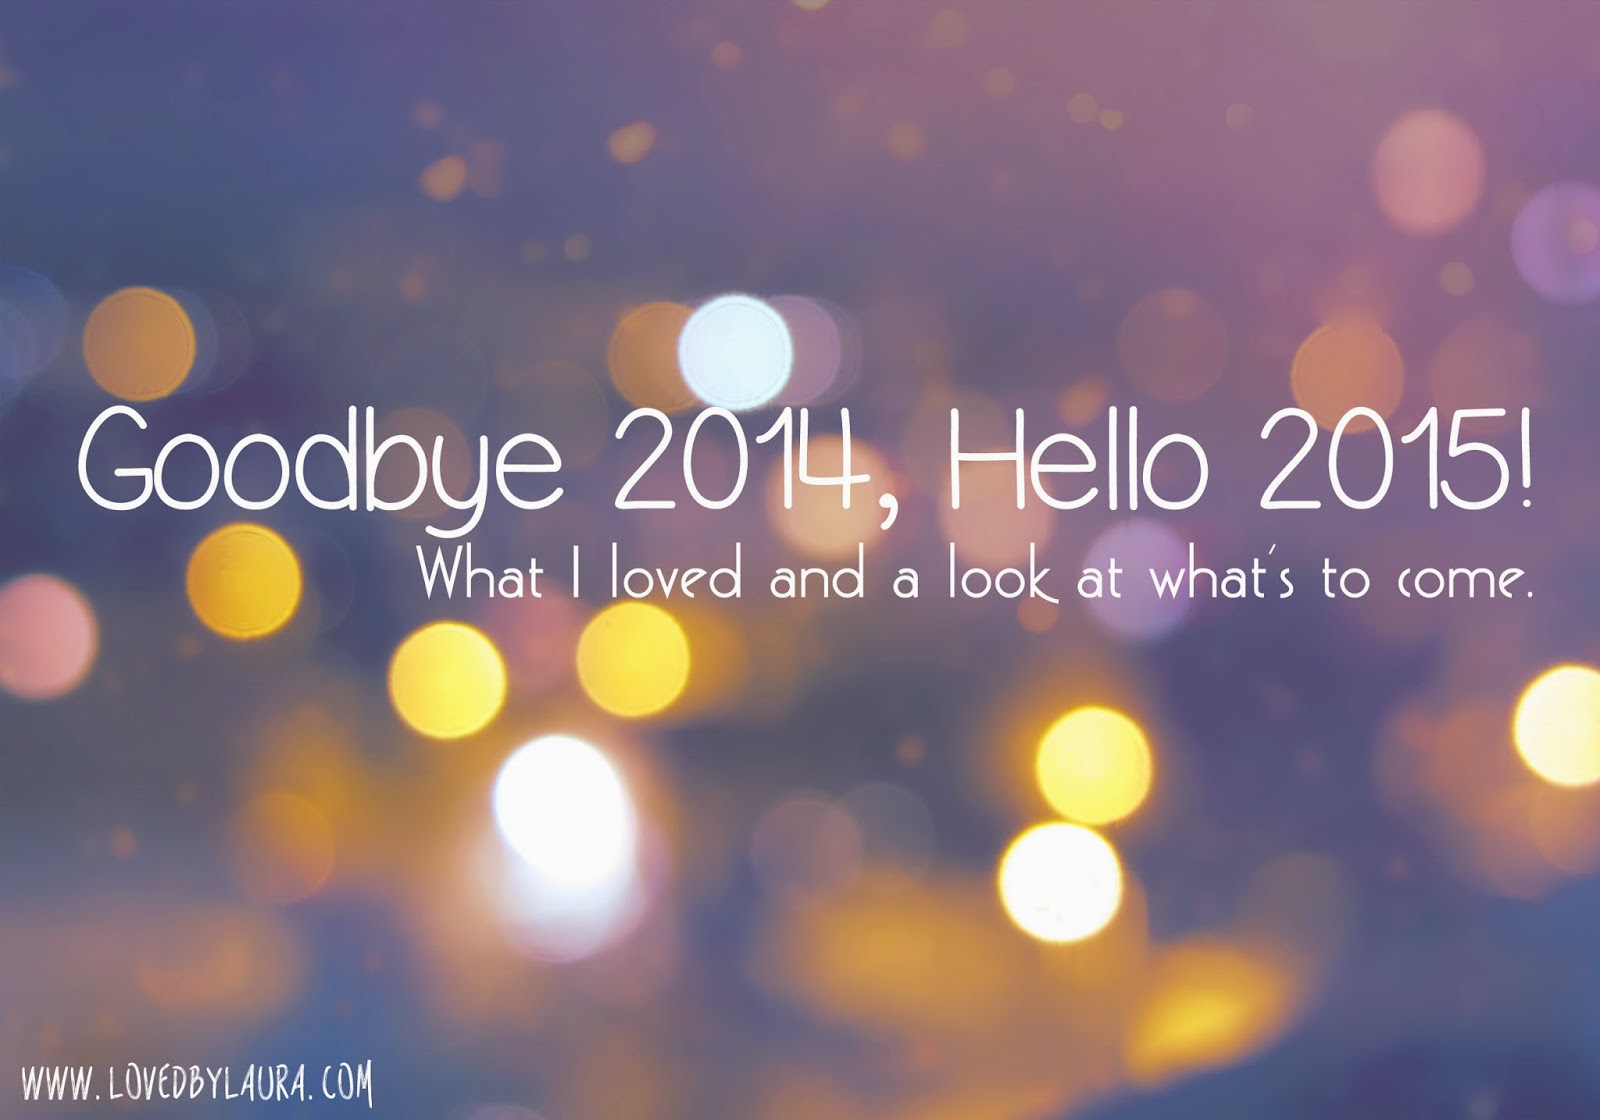 Goodbye 2014, Hello 2015 / What I loved the most and a look at what's coming up